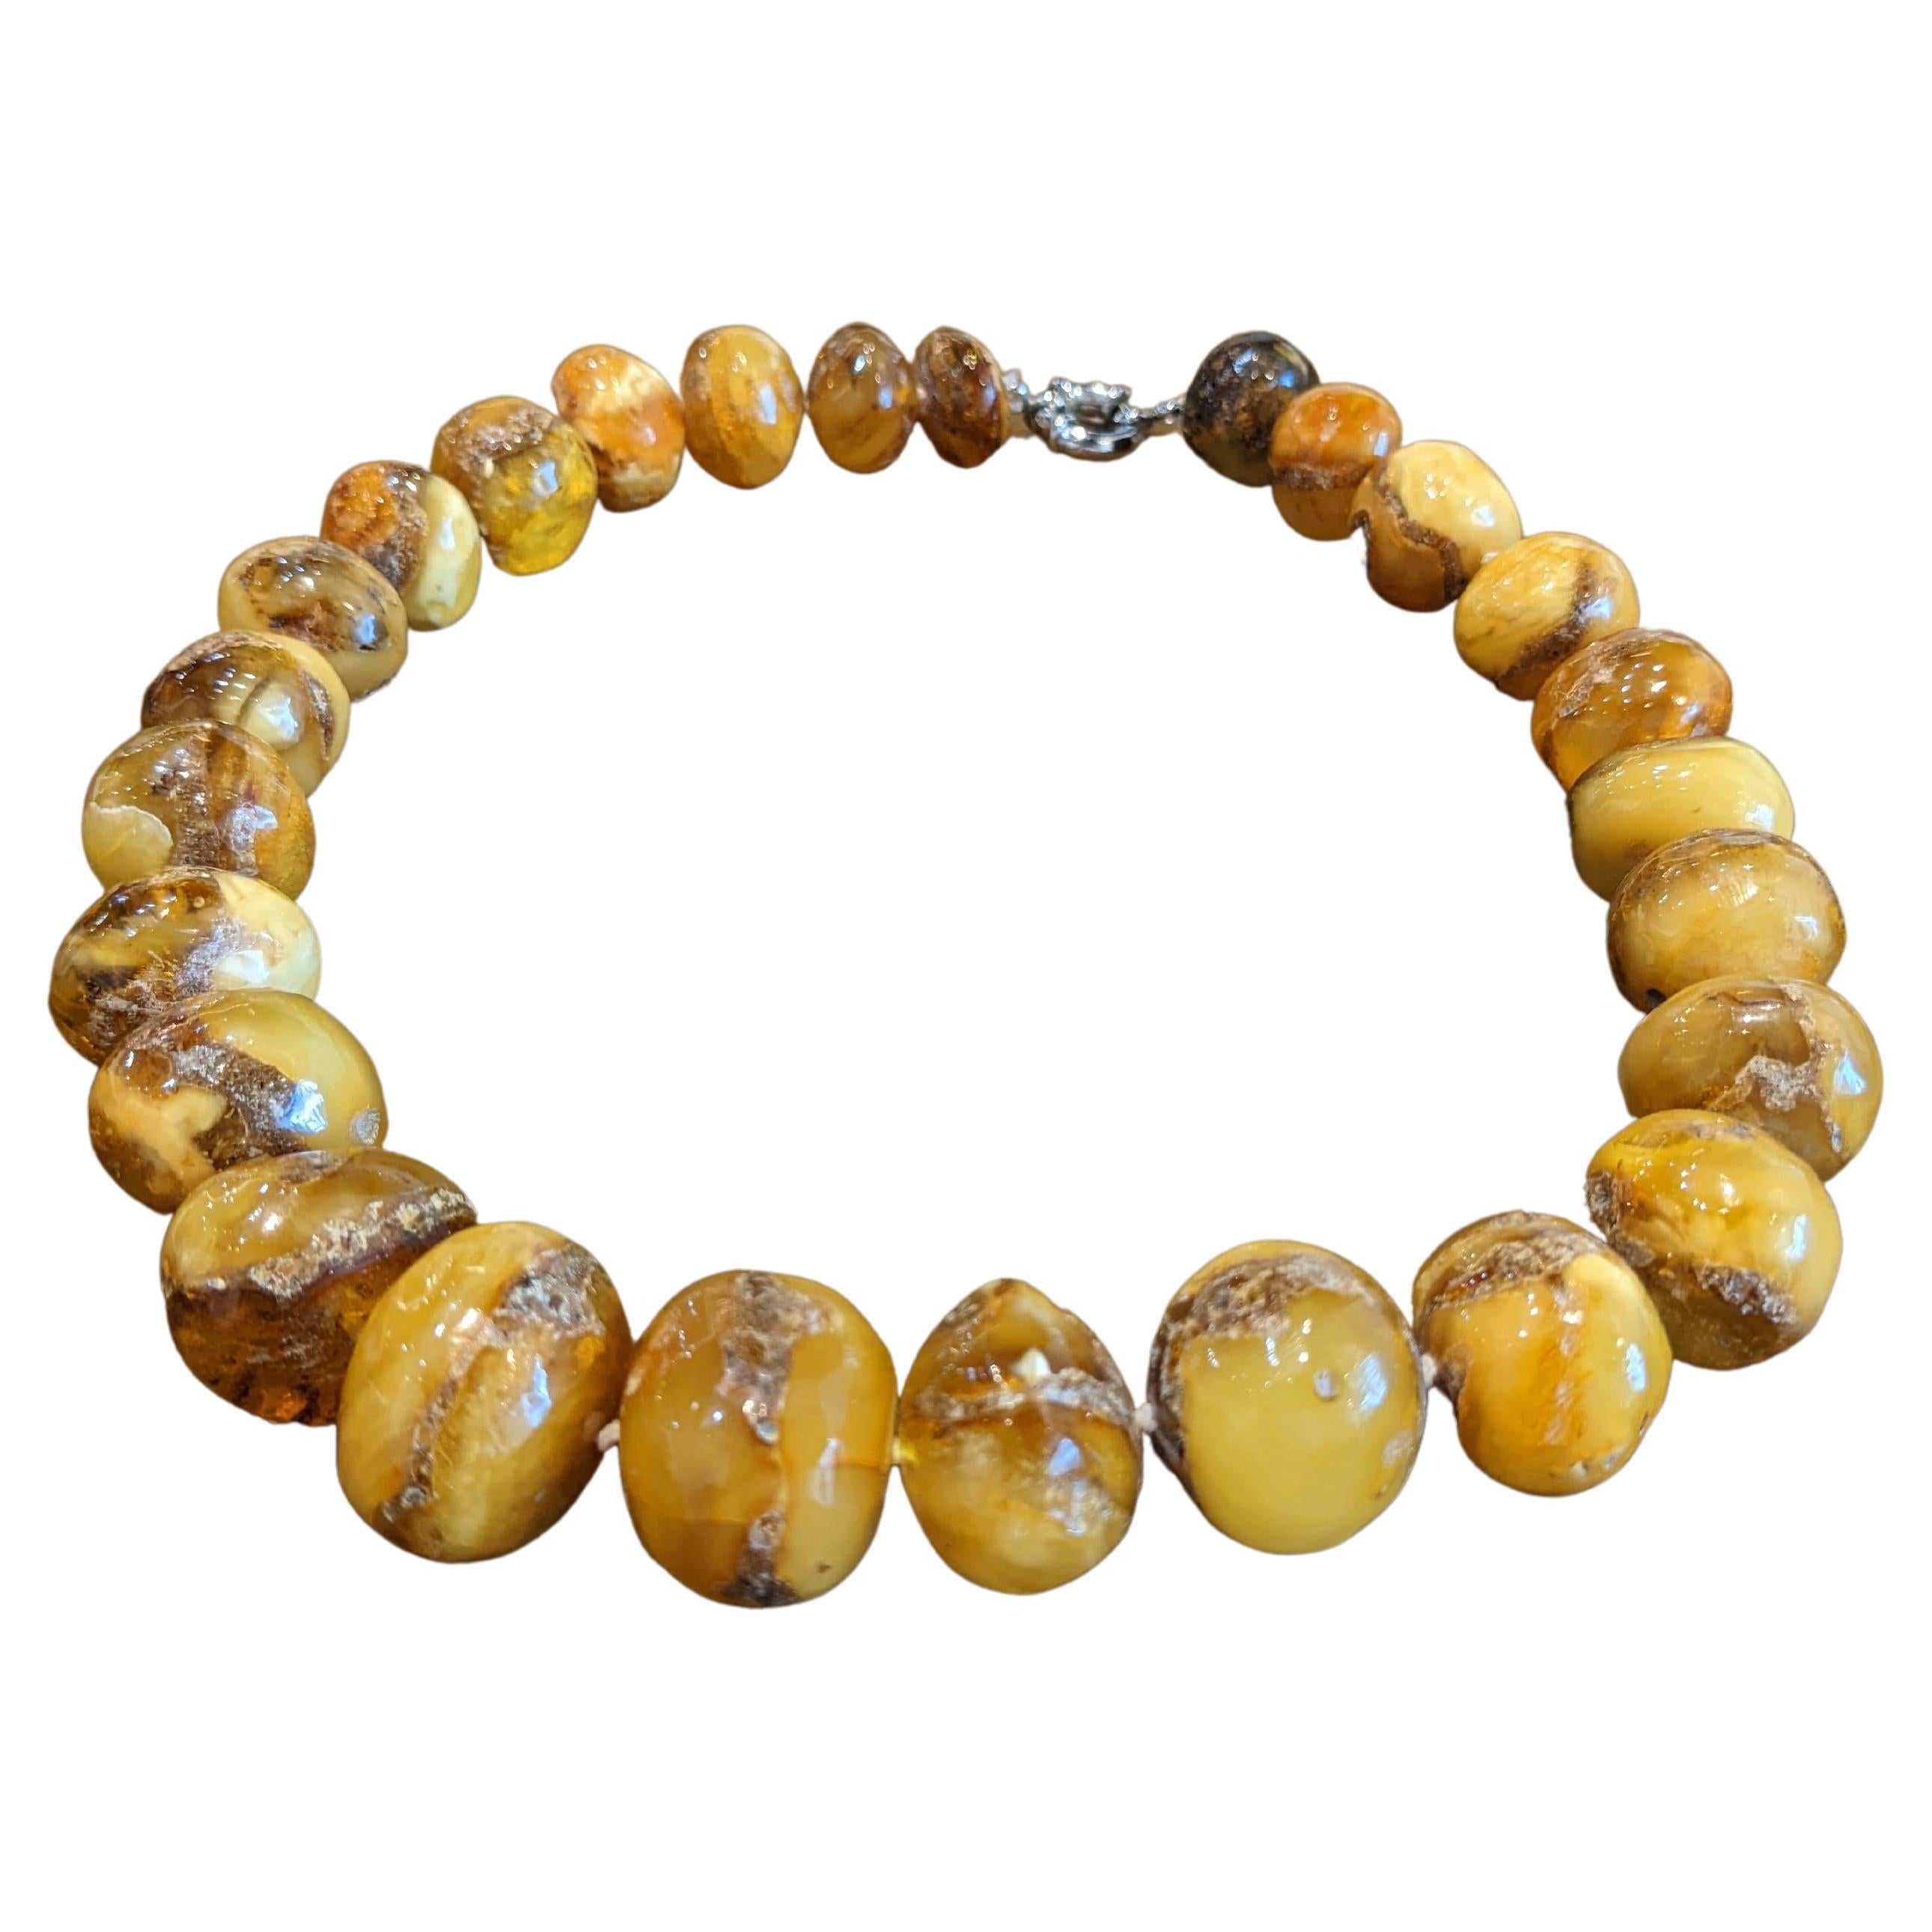 Natural Baltic Amber Rough Cut Beaded Necklace